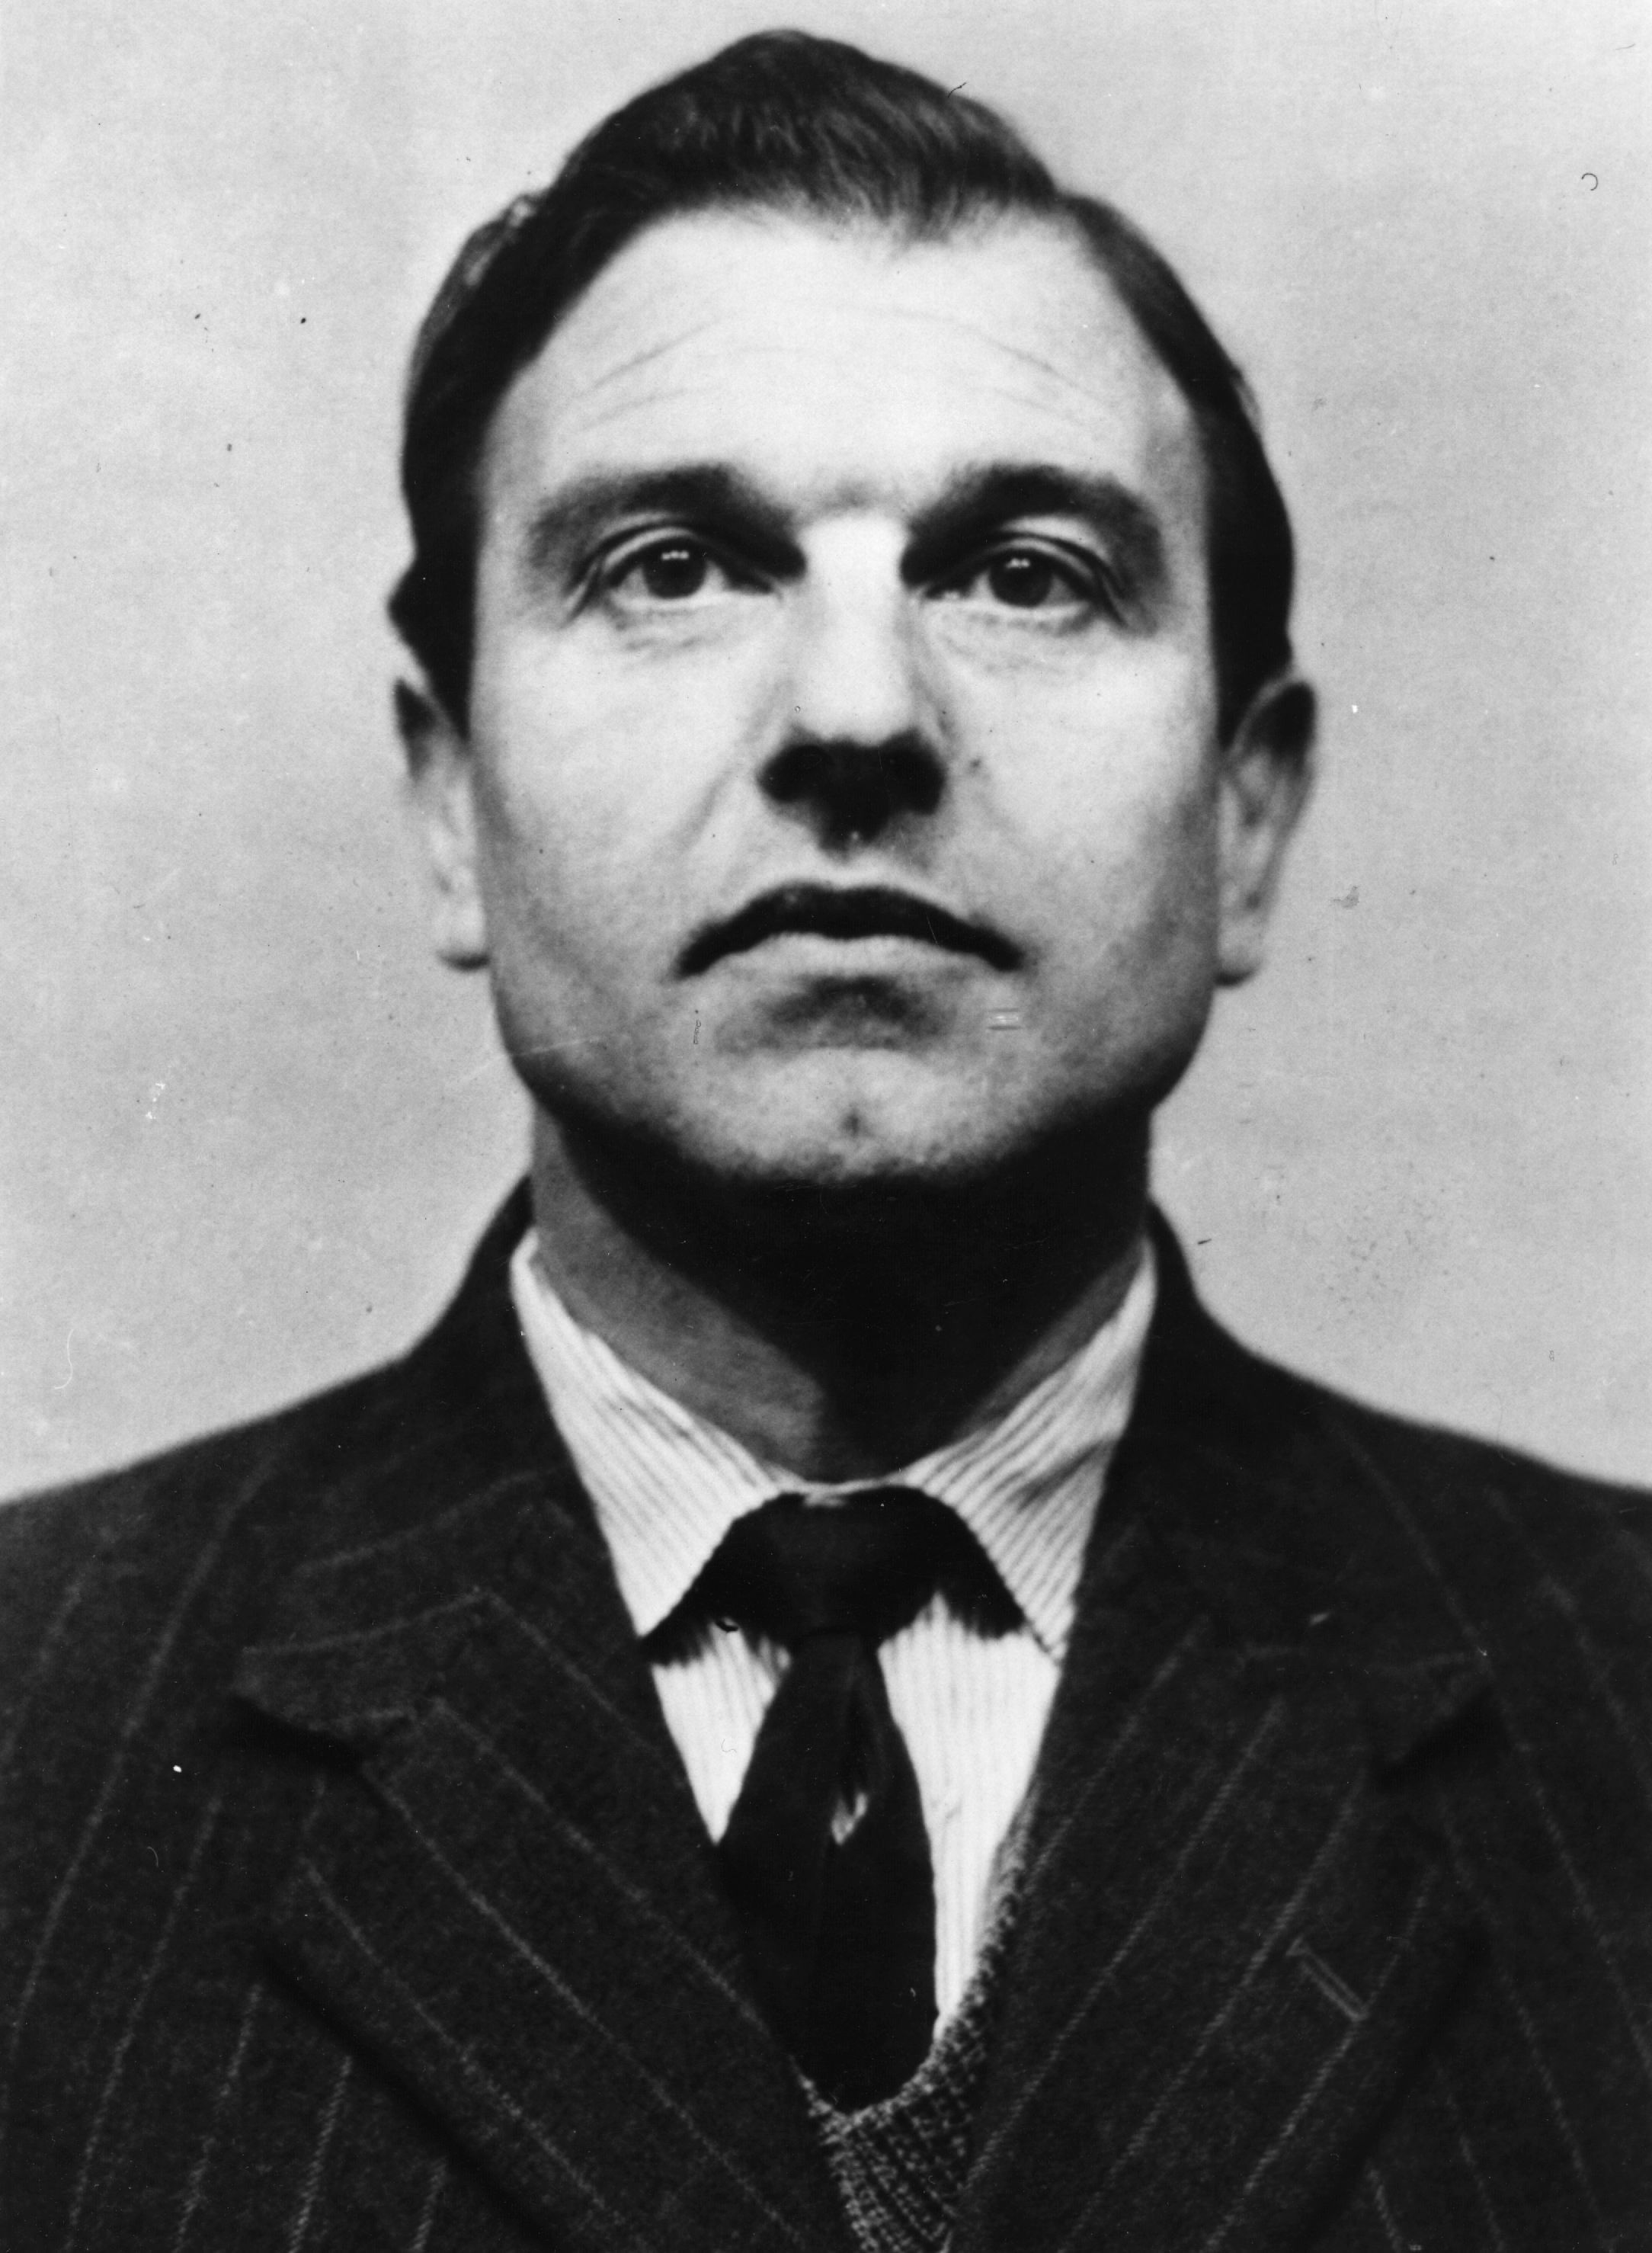 piccture of George Blake that circulated after his release from Wormwood Scrubs in 1966